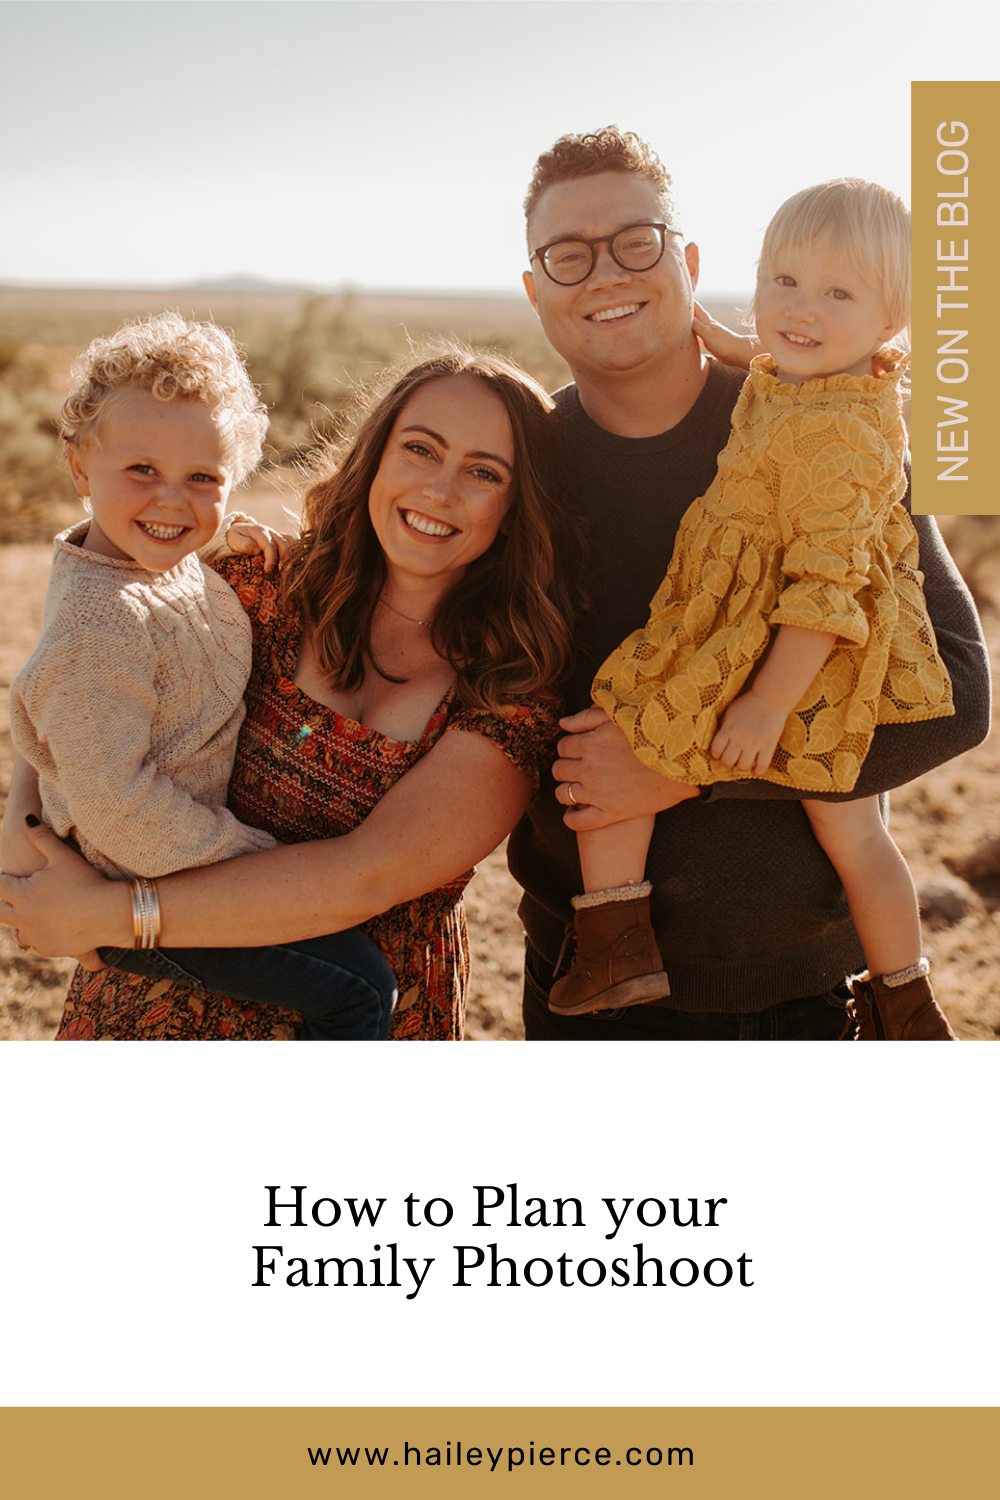 how-to-plan-family-photoshoot-tips-1.png